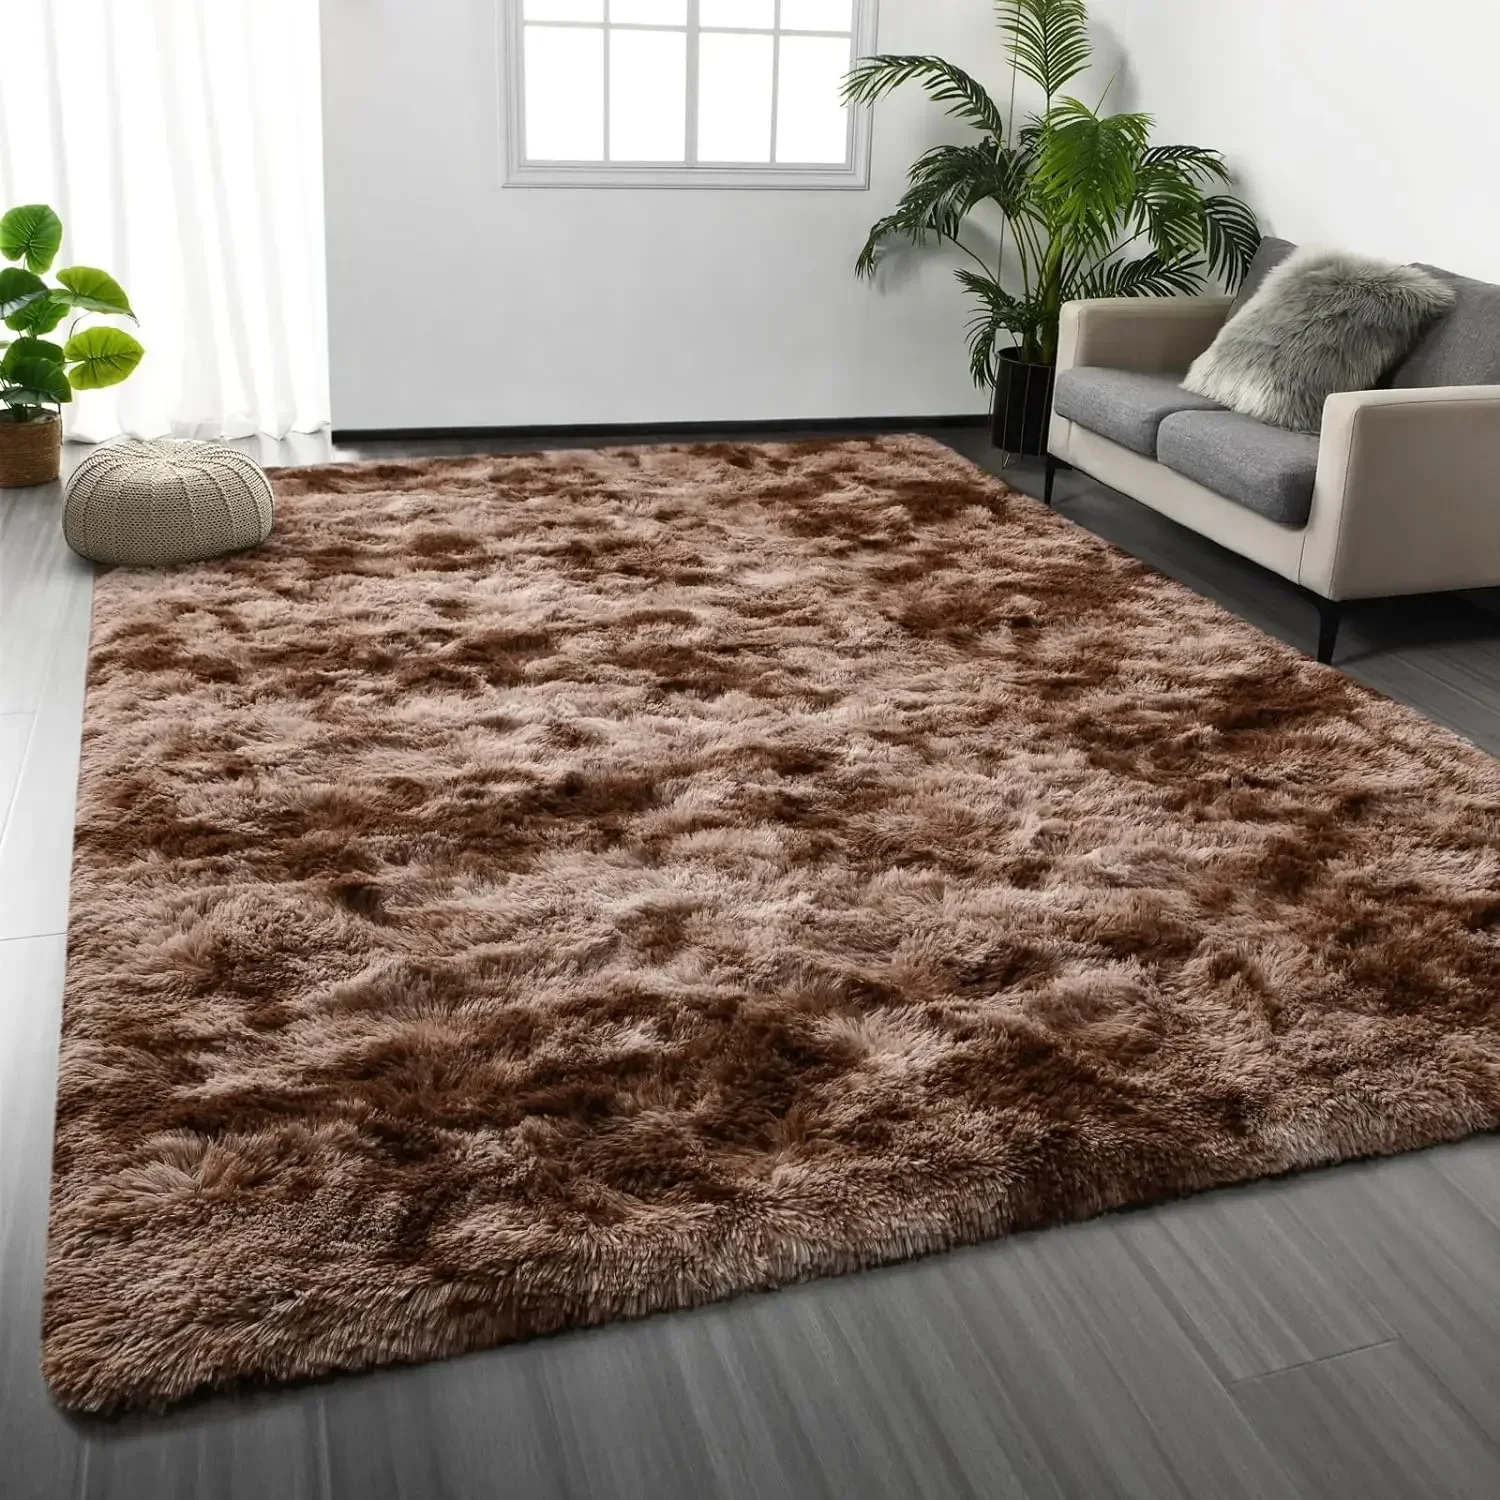 

Furniture suppliesLarge Shag Area Rugs 8 x 10, Tie-Dyed Plush Fuzzy Rugs for Living Room, Ultra Soft Fluffy Furry Rugs for Bedro